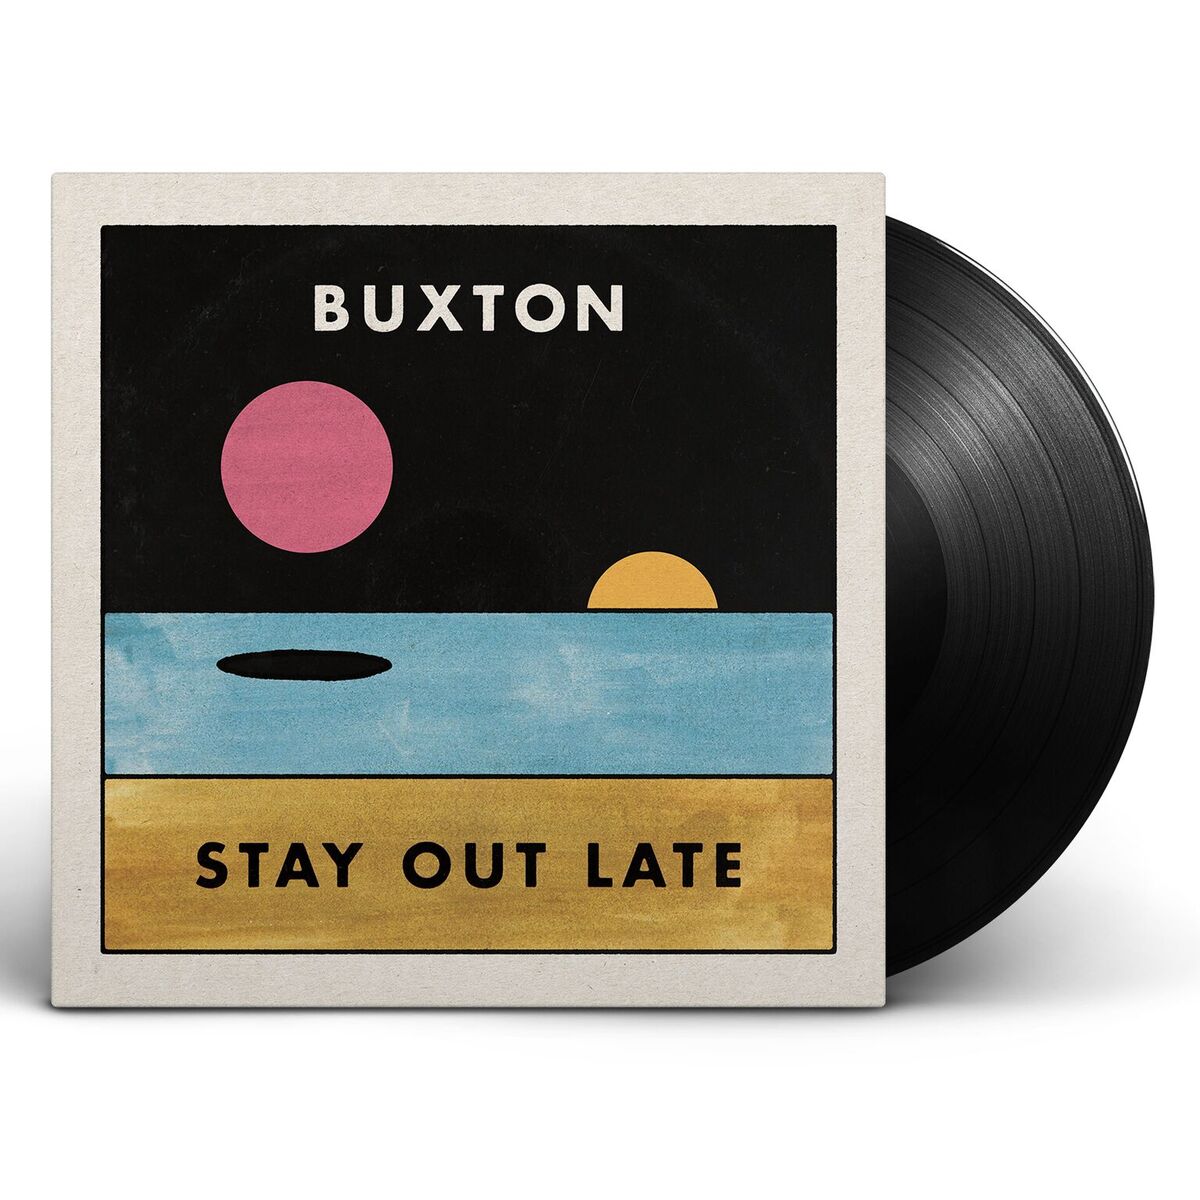 Buxton - Stay Out Late [Vinyl]